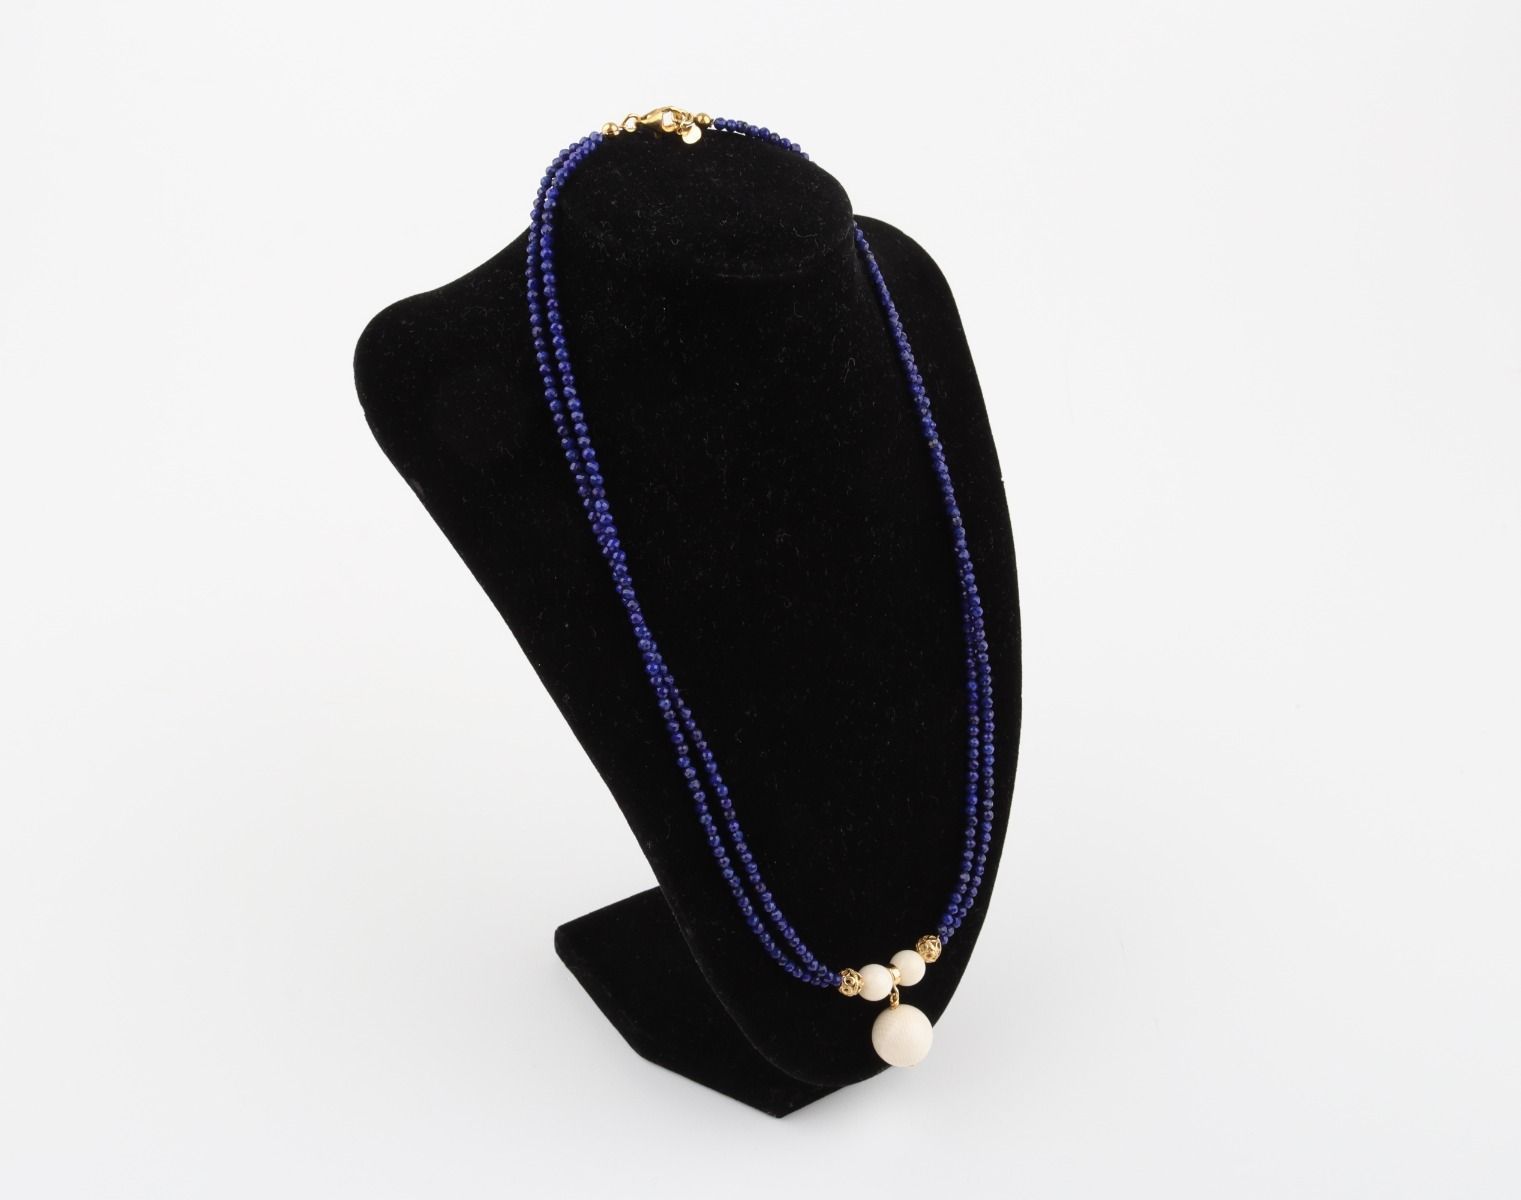 Faceted Lapis Lazuli & Mammoth Ivory Necklace